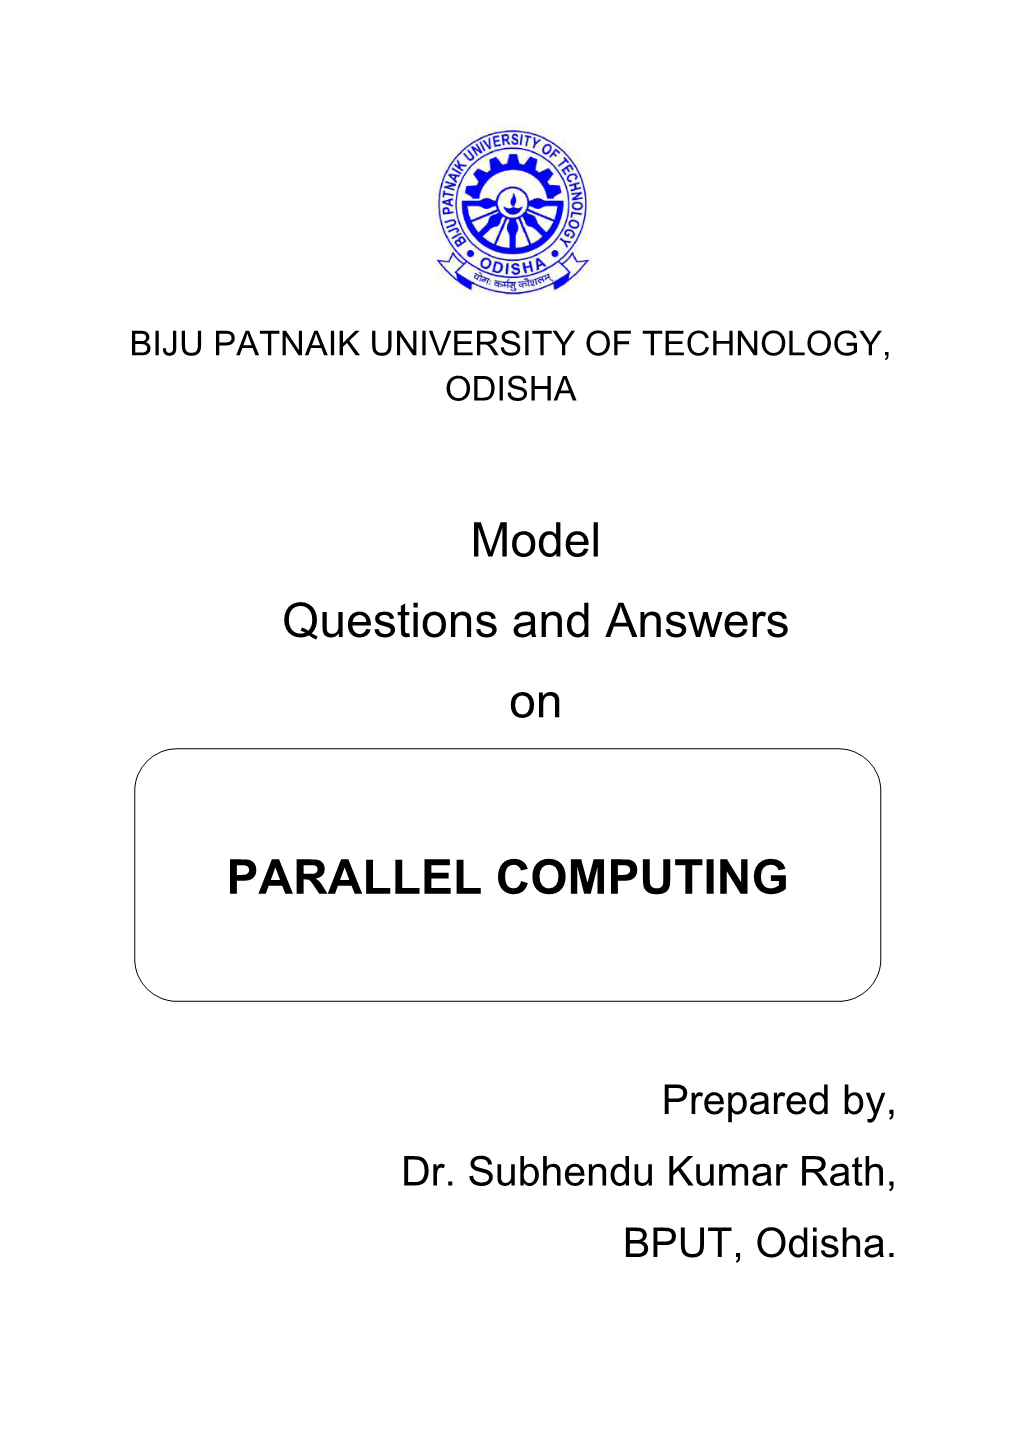 Model Questions and Answers on PARALLEL COMPUTING